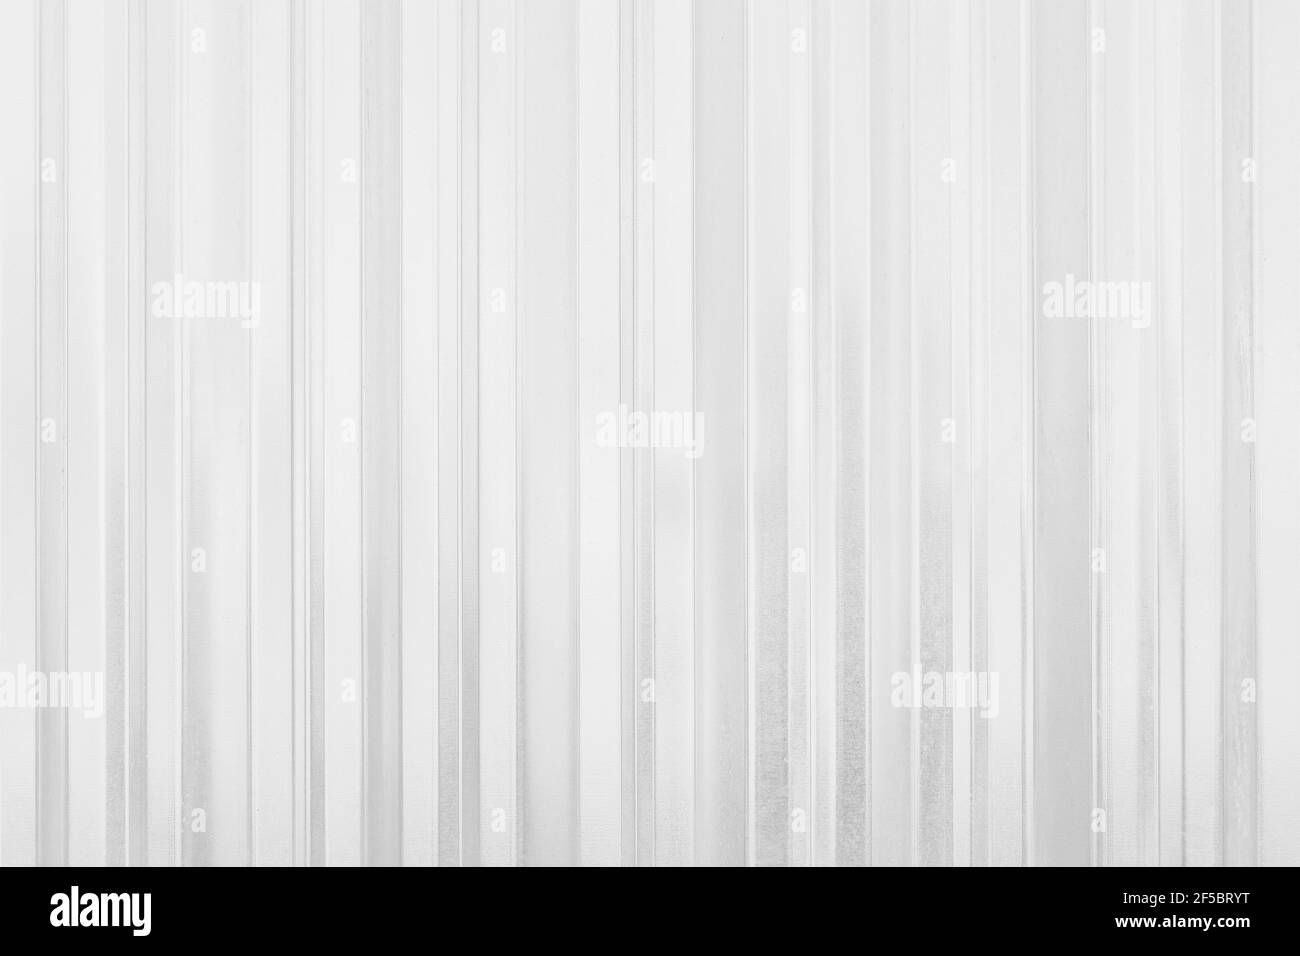 Silver color metal fence texture abstract wallpaper background. Stock Photo